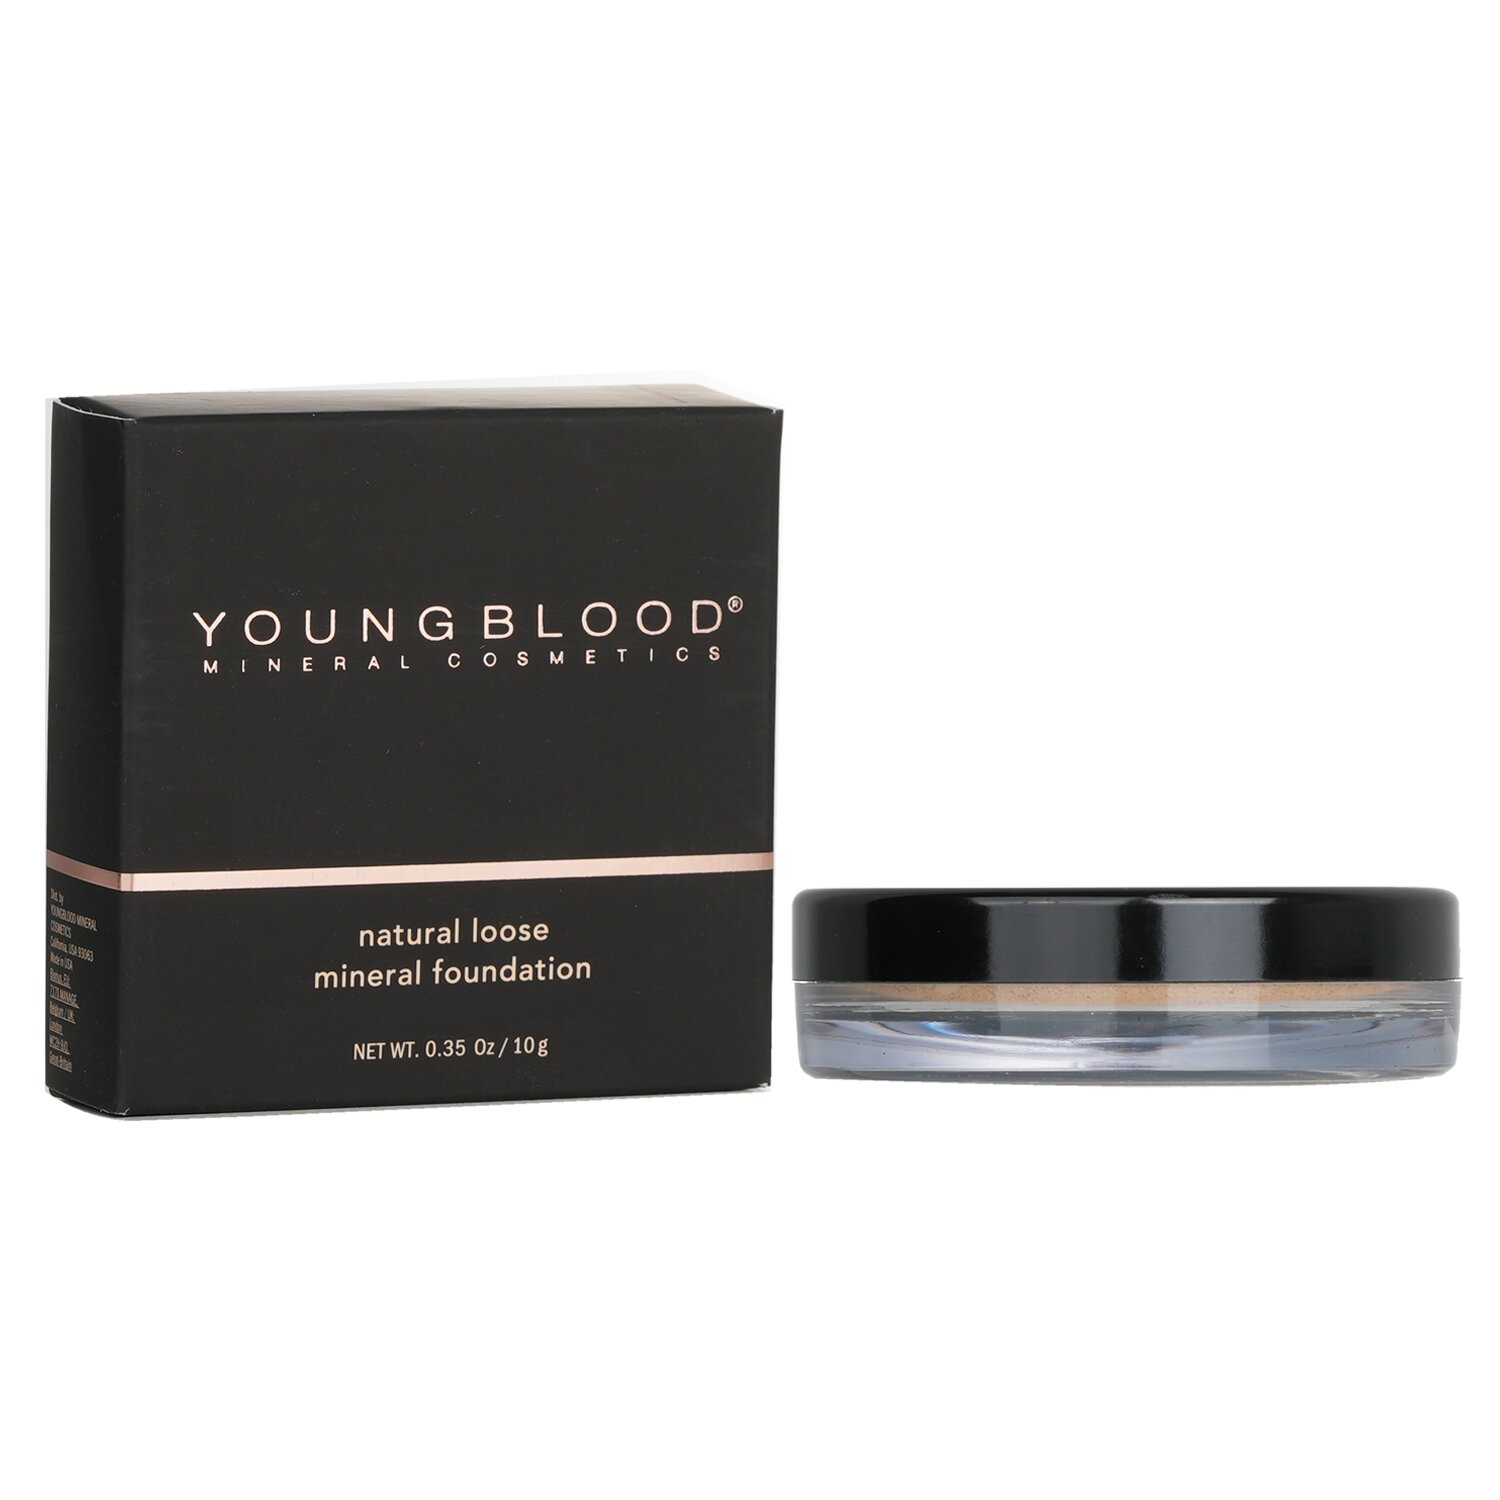 Youngblood Base Maquillaje Natural Mineral Polvos Sueltos 10g/0.35oz